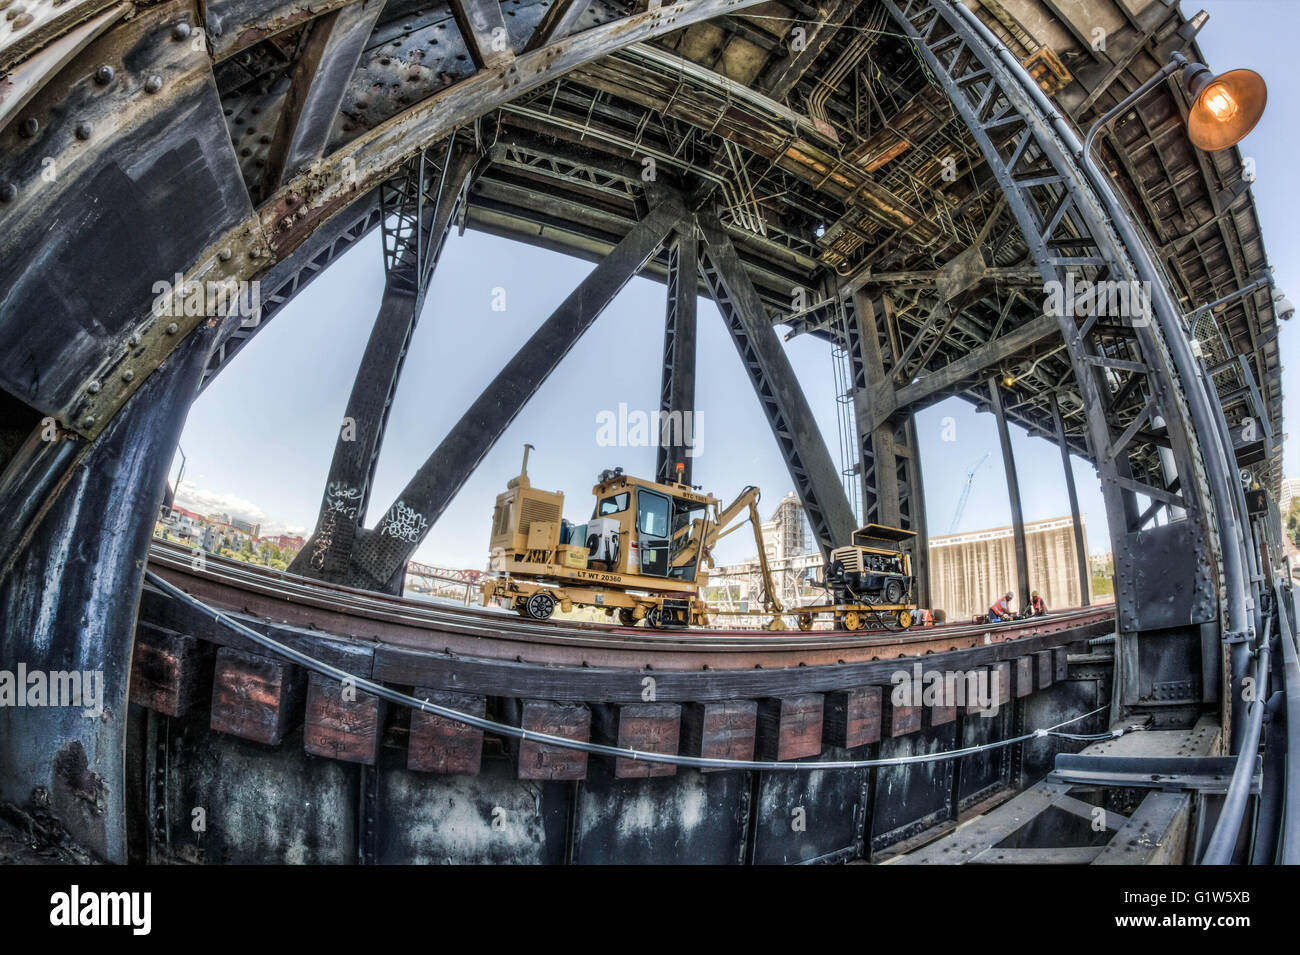 Work being done on the rail under a steel bridge Stock Photo